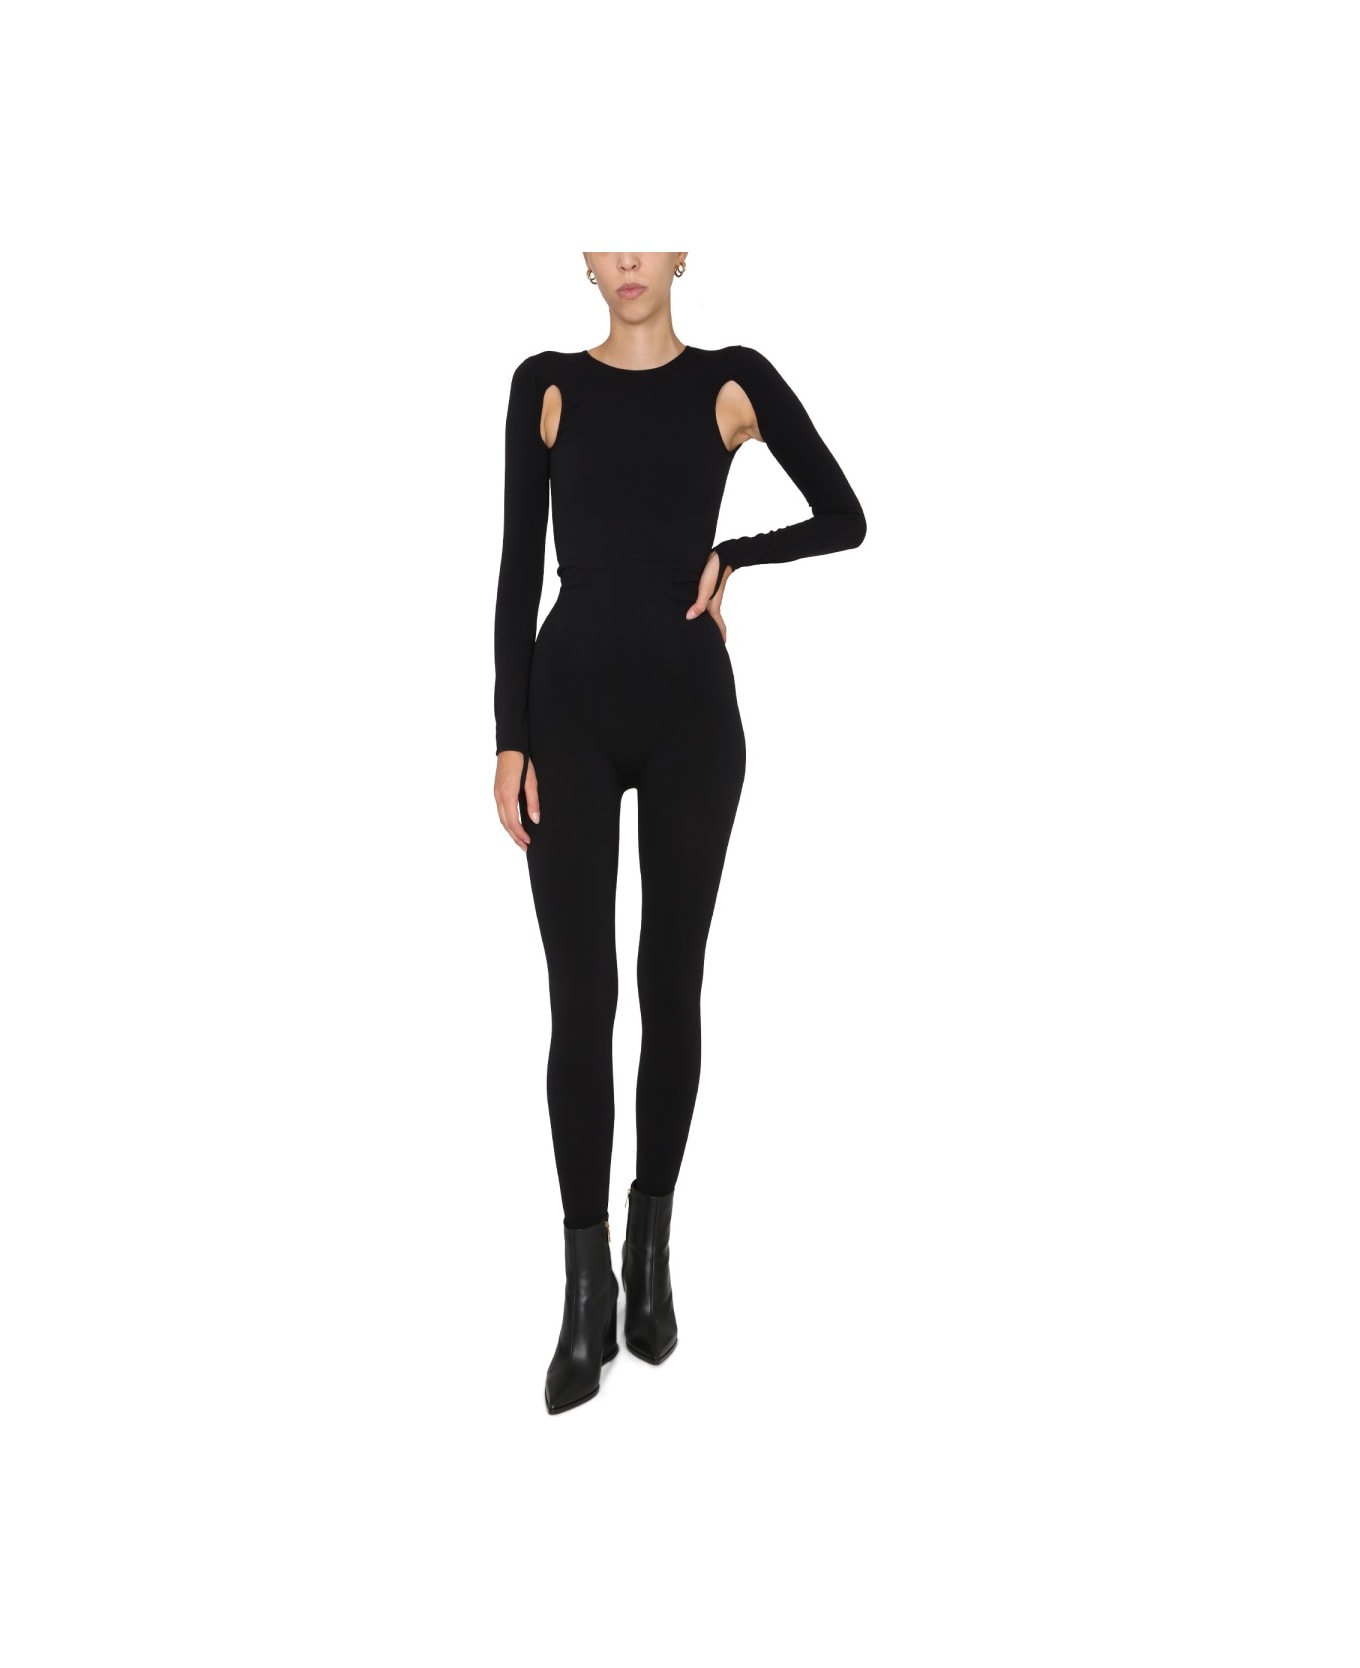 ANDREĀDAMO Full Jumpsuit With Cut-out Details - BLACK ジャンプスーツ